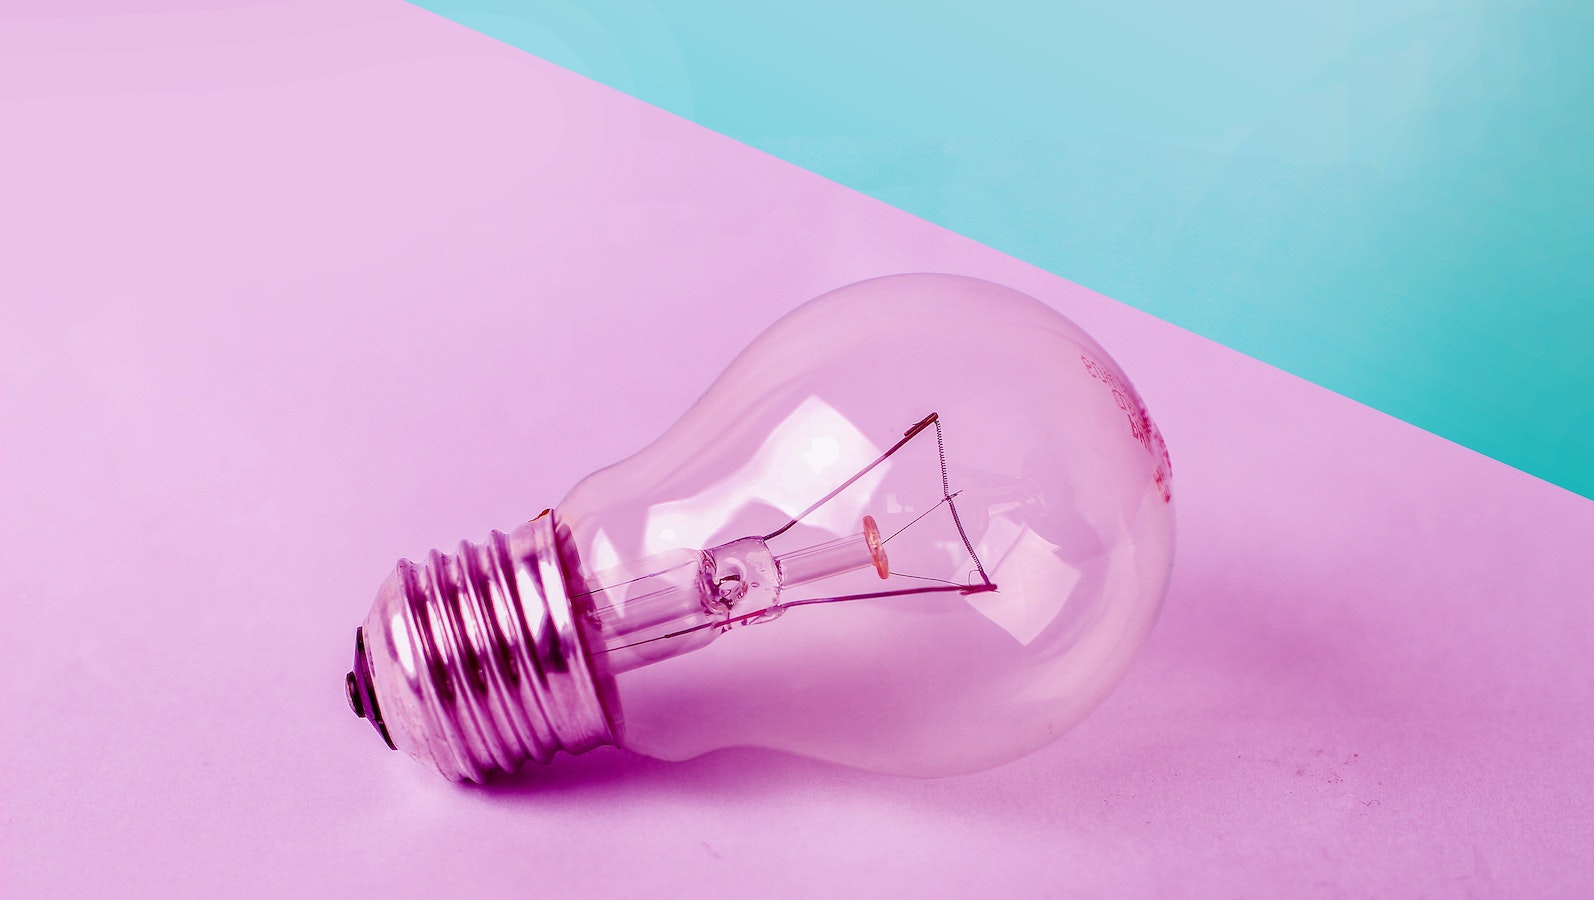 Light bulb on a pink and blue background